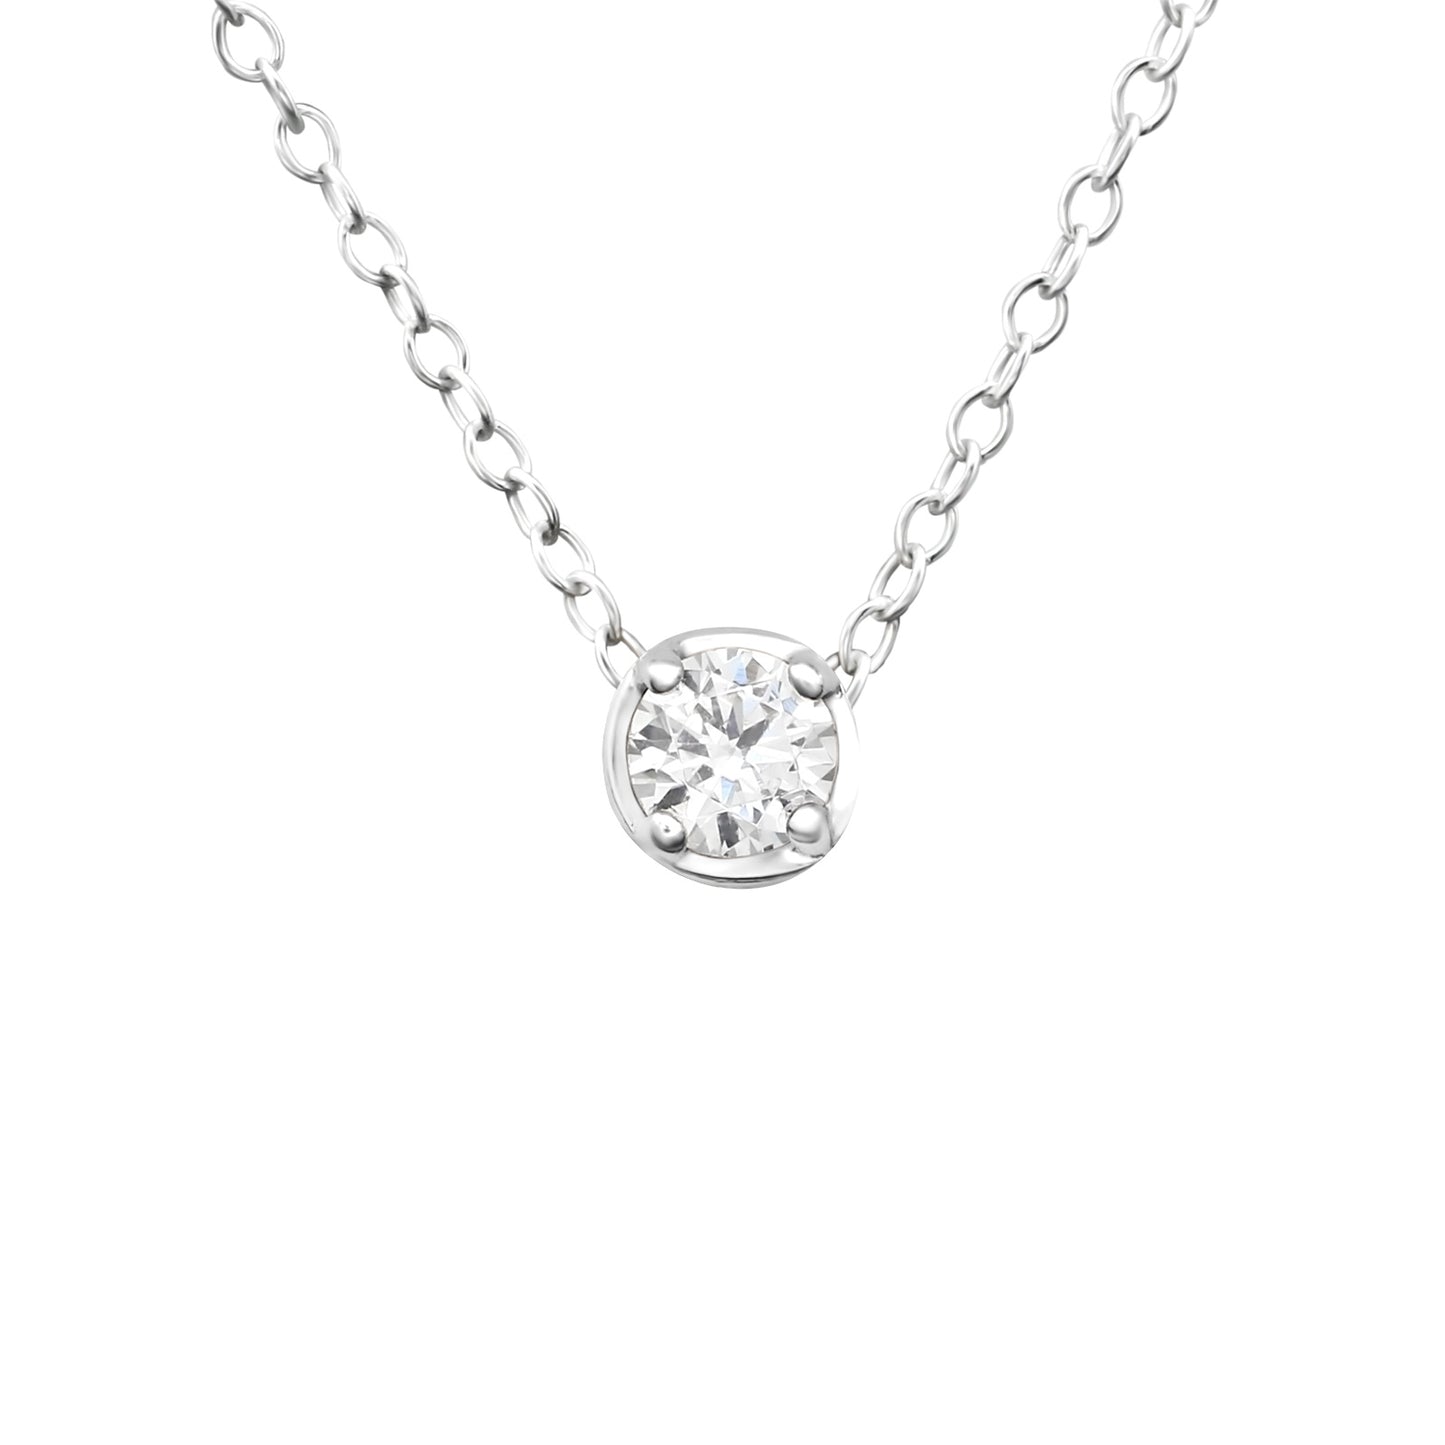 Women's Silver Plated Sparkly Round Pendant Necklace with Cubic Zirconia